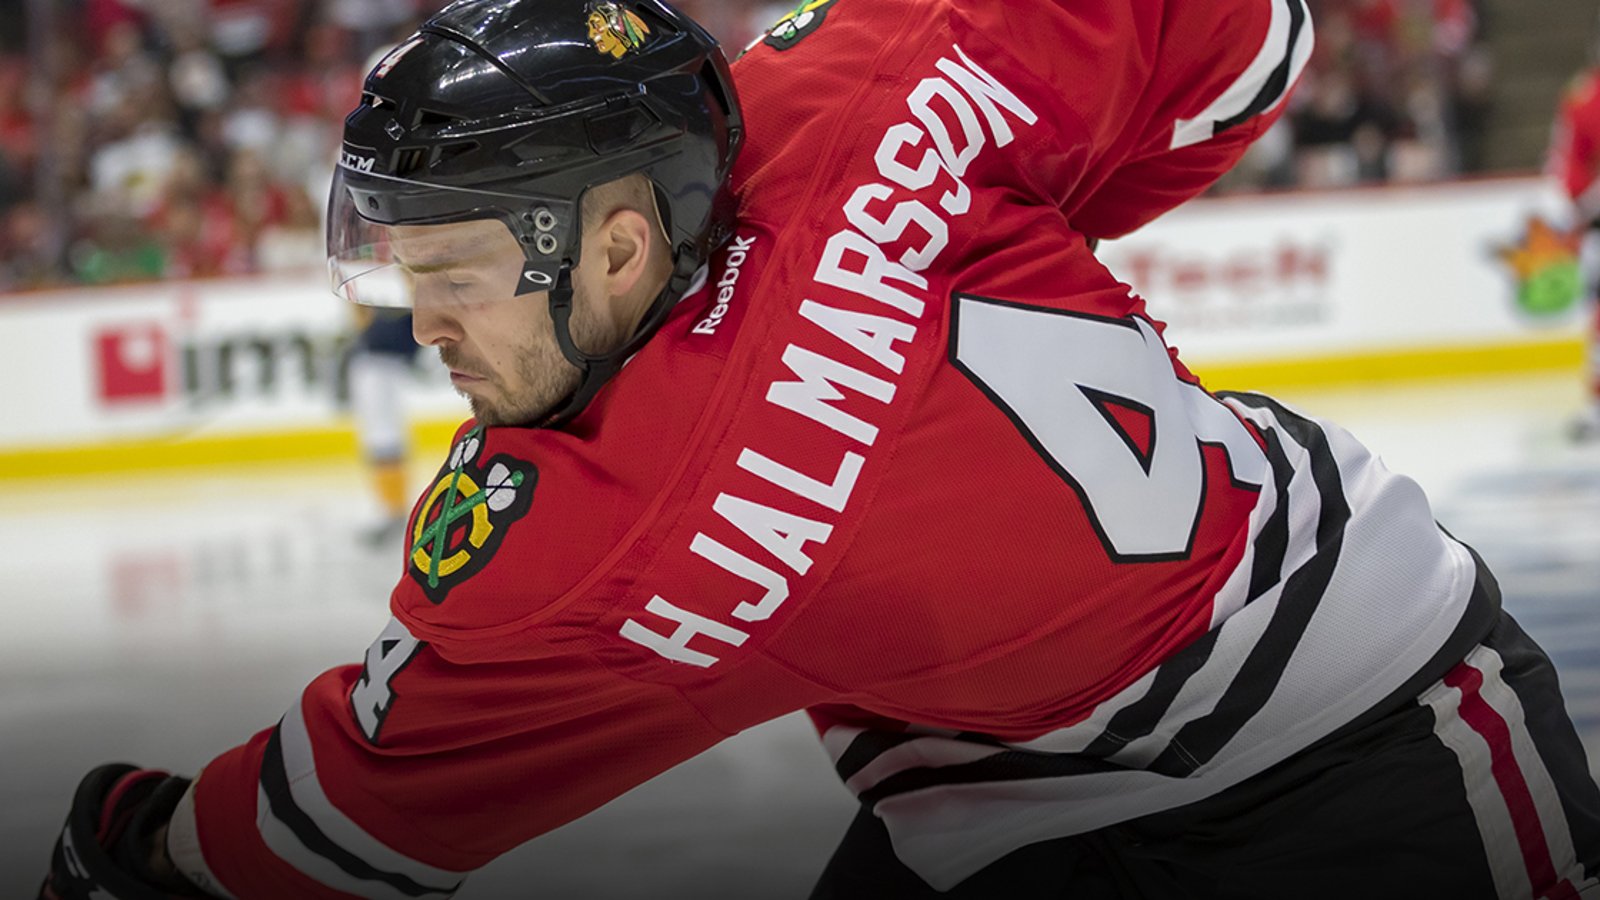 Hjarlmarsson makes an emotional comment ahead of tonight's game vs Hawks